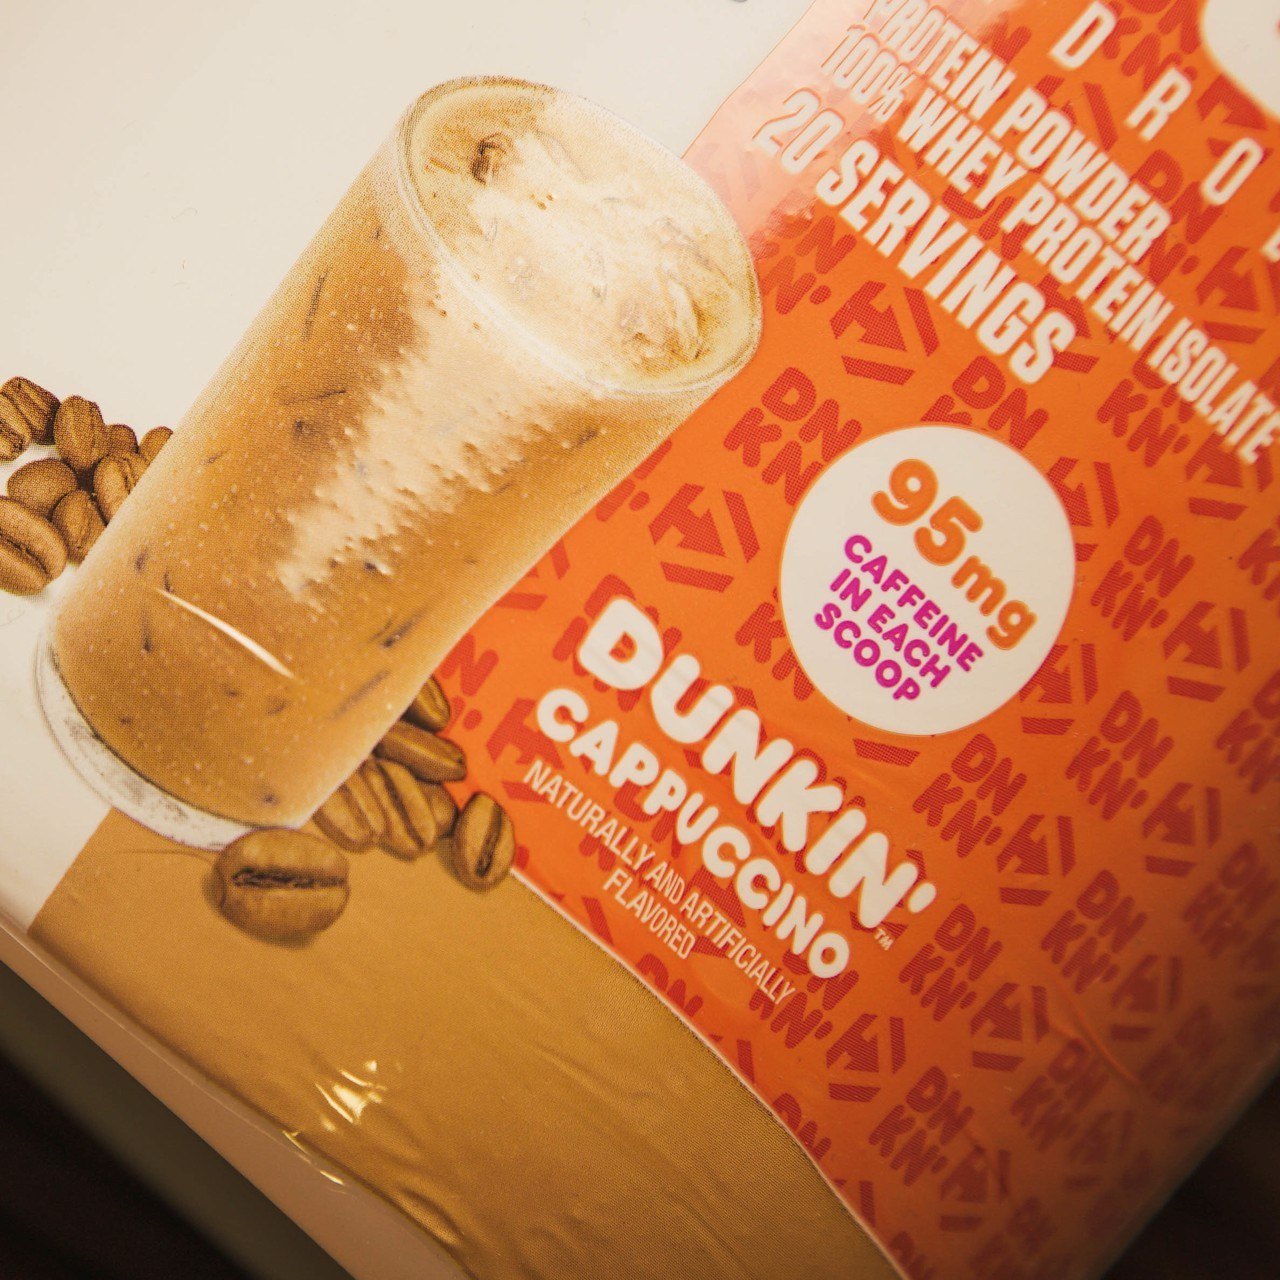 Dymatize Iso 100 Dunkin' Donuts Editions Cappuccino Coalition Nutrition